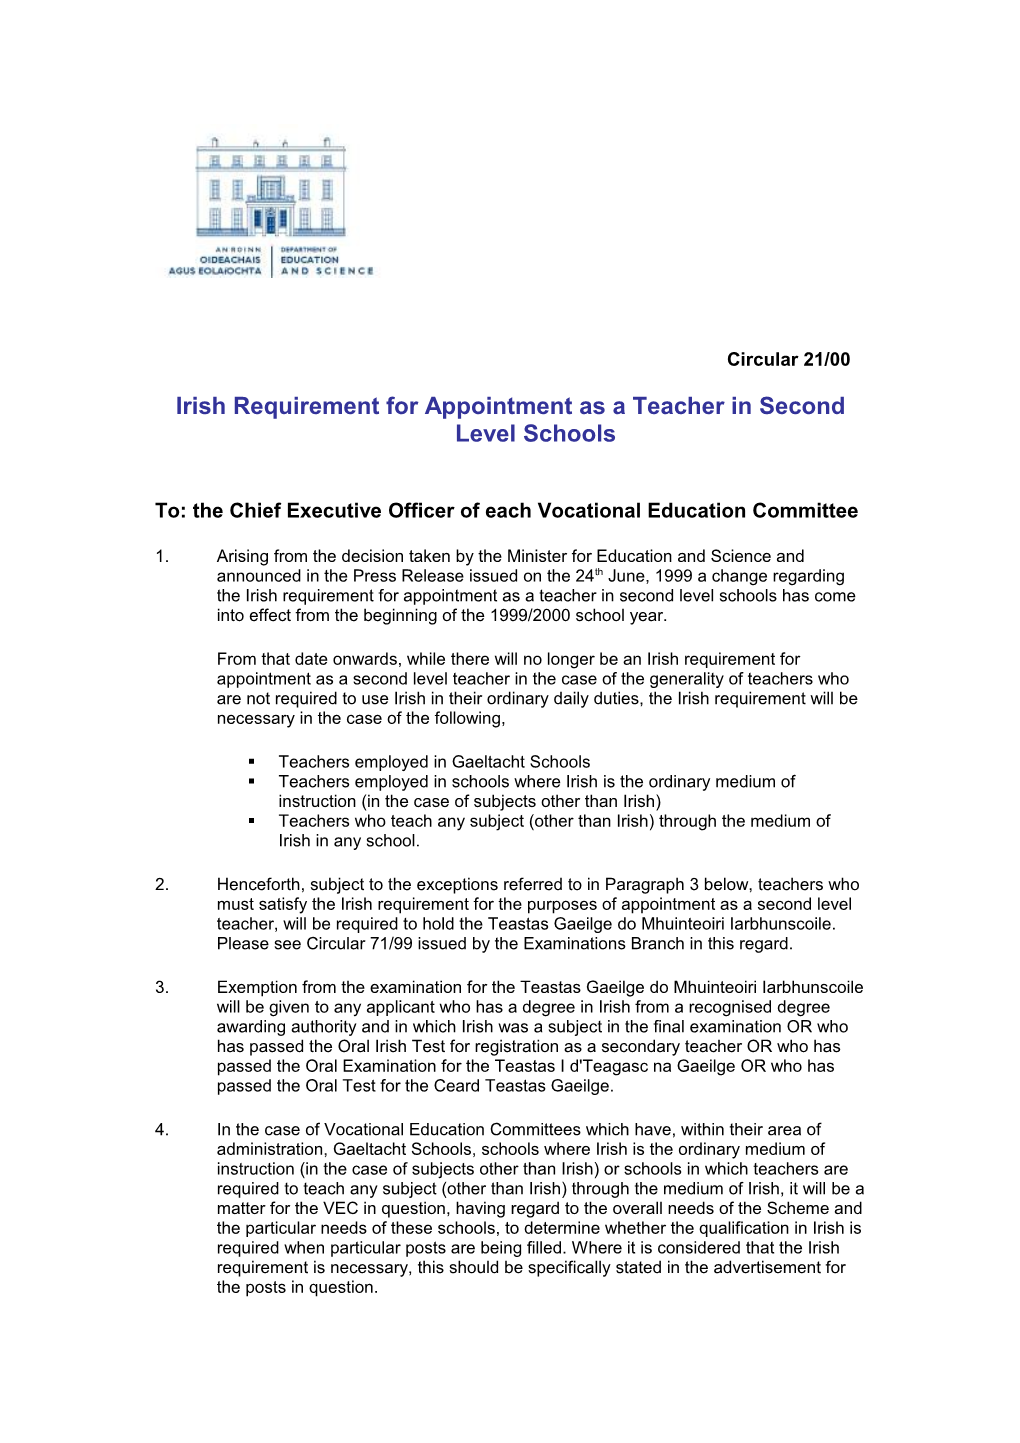 Circular 21/00 - Irish Requirement for Appointment As a Teacher in Second Level Schools